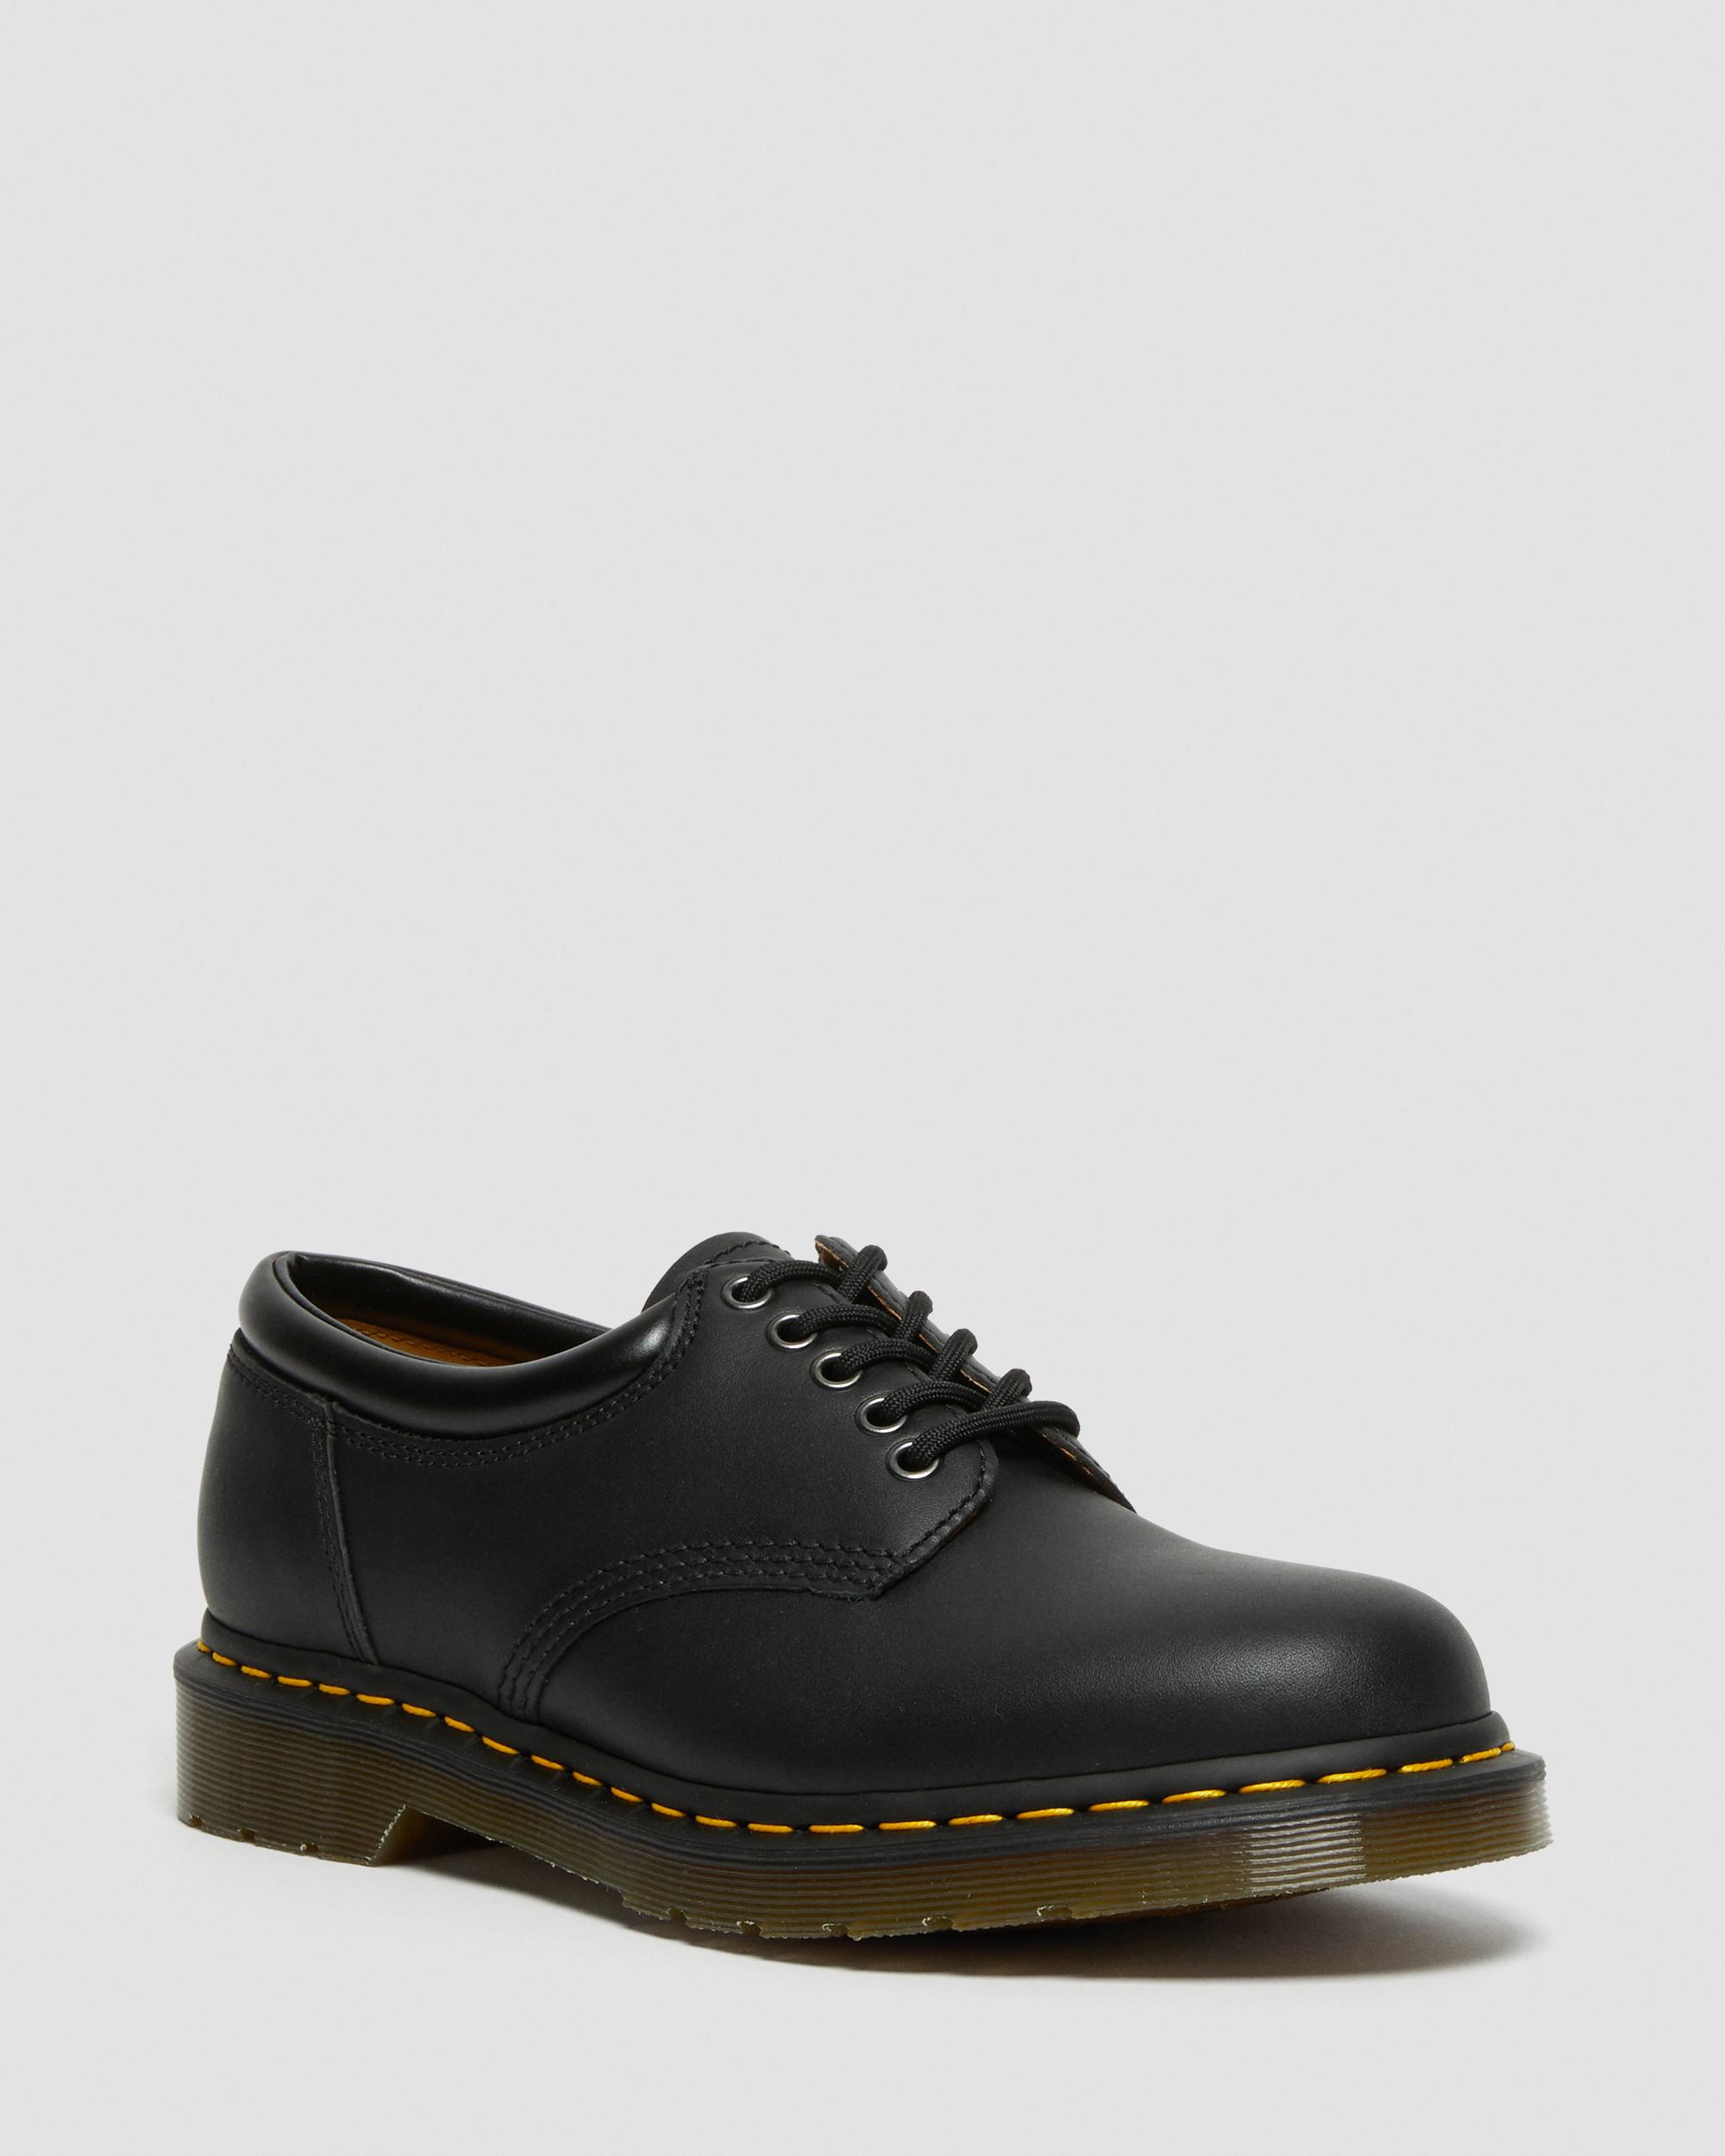 8053 Nappa Leather Casual Shoes in Black